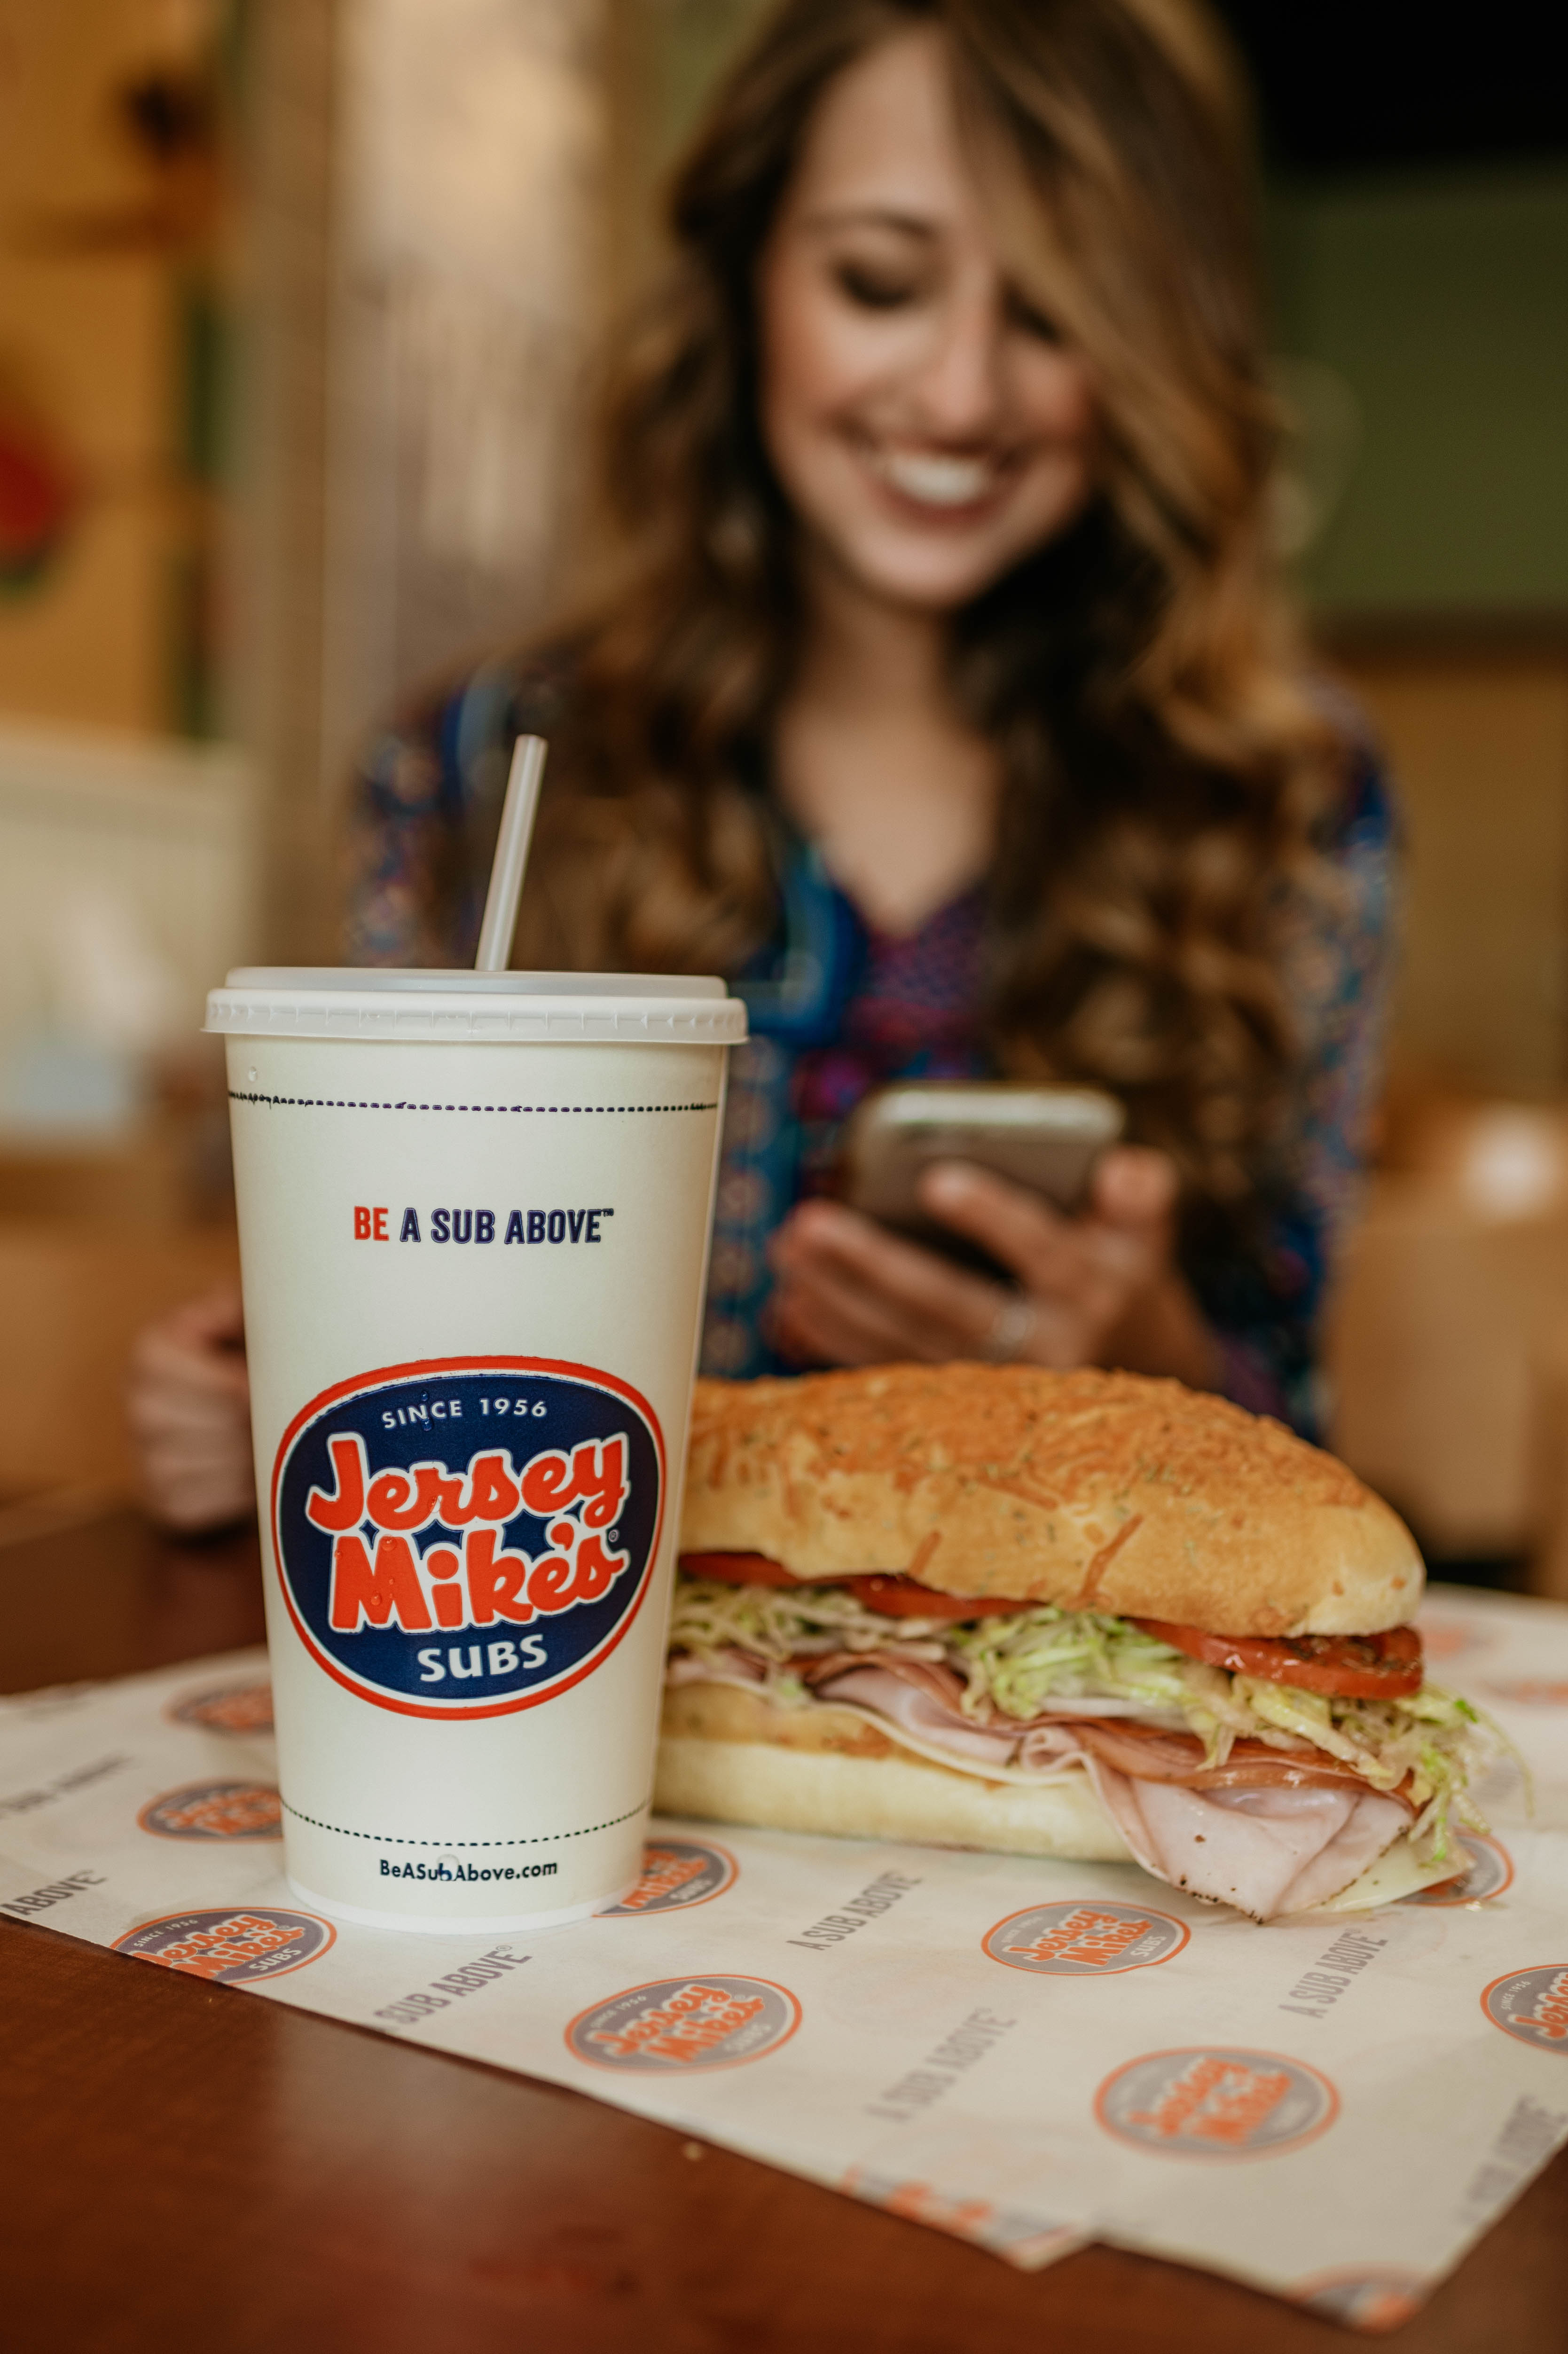 jersey mike's app